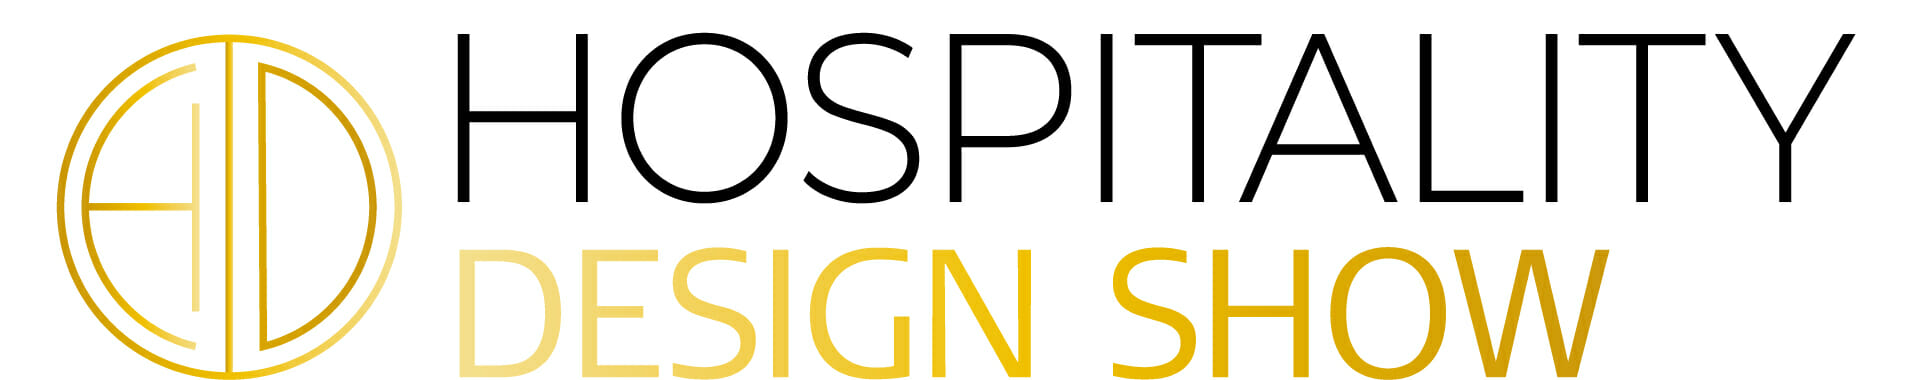 Hospitality Design Show | 18th & 19th of September 2019 | Excel, London